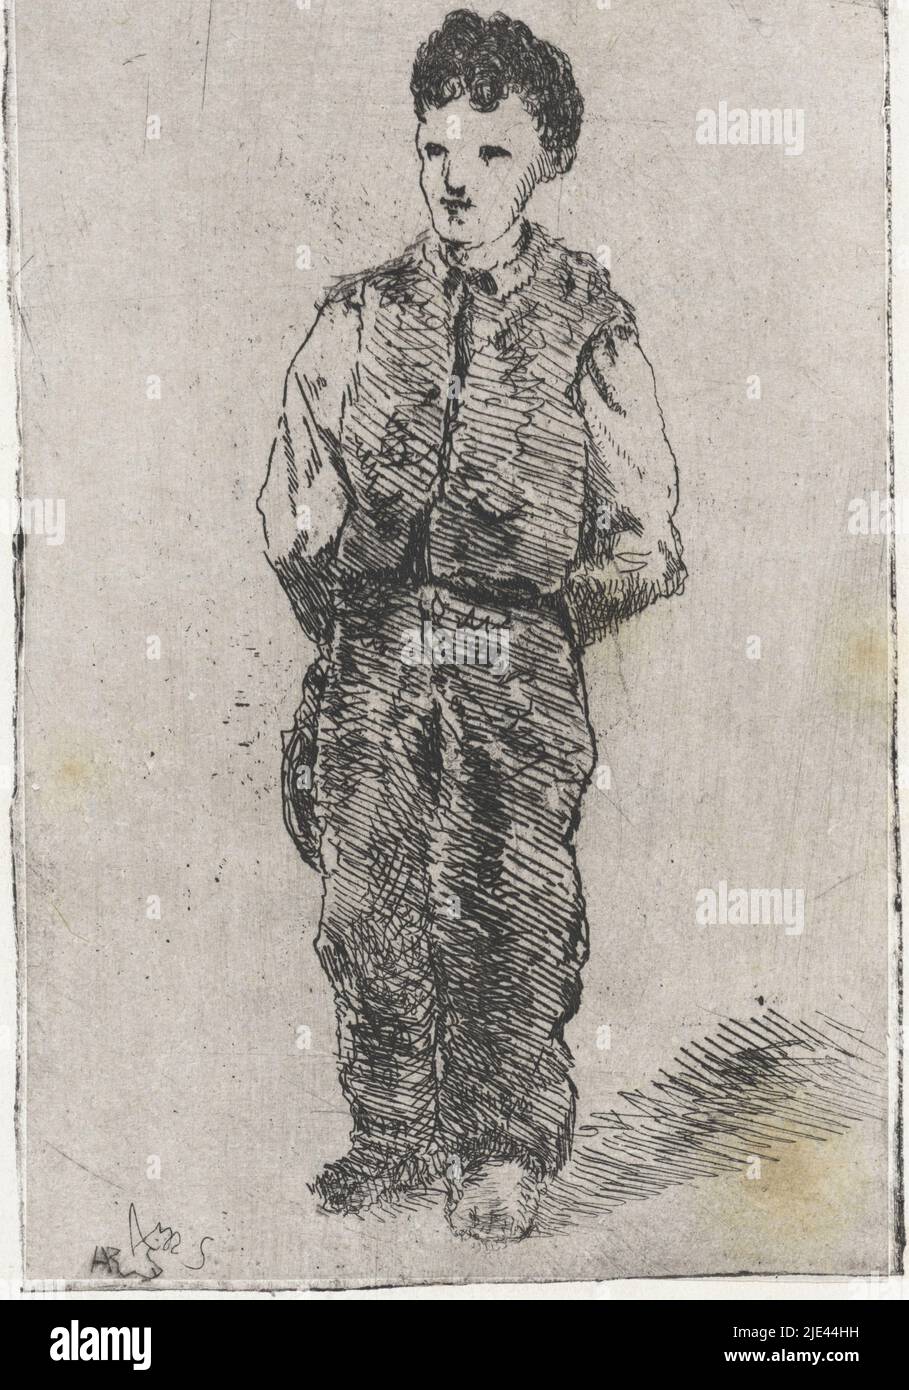 Young man in overalls, Arnoud Schaepkens, 1831 - 1904, print maker: Arnoud Schaepkens, (mentioned on object), 1831 - 1904, paper, etching, drypoint, h 142 mm × w 90 mm Stock Photo